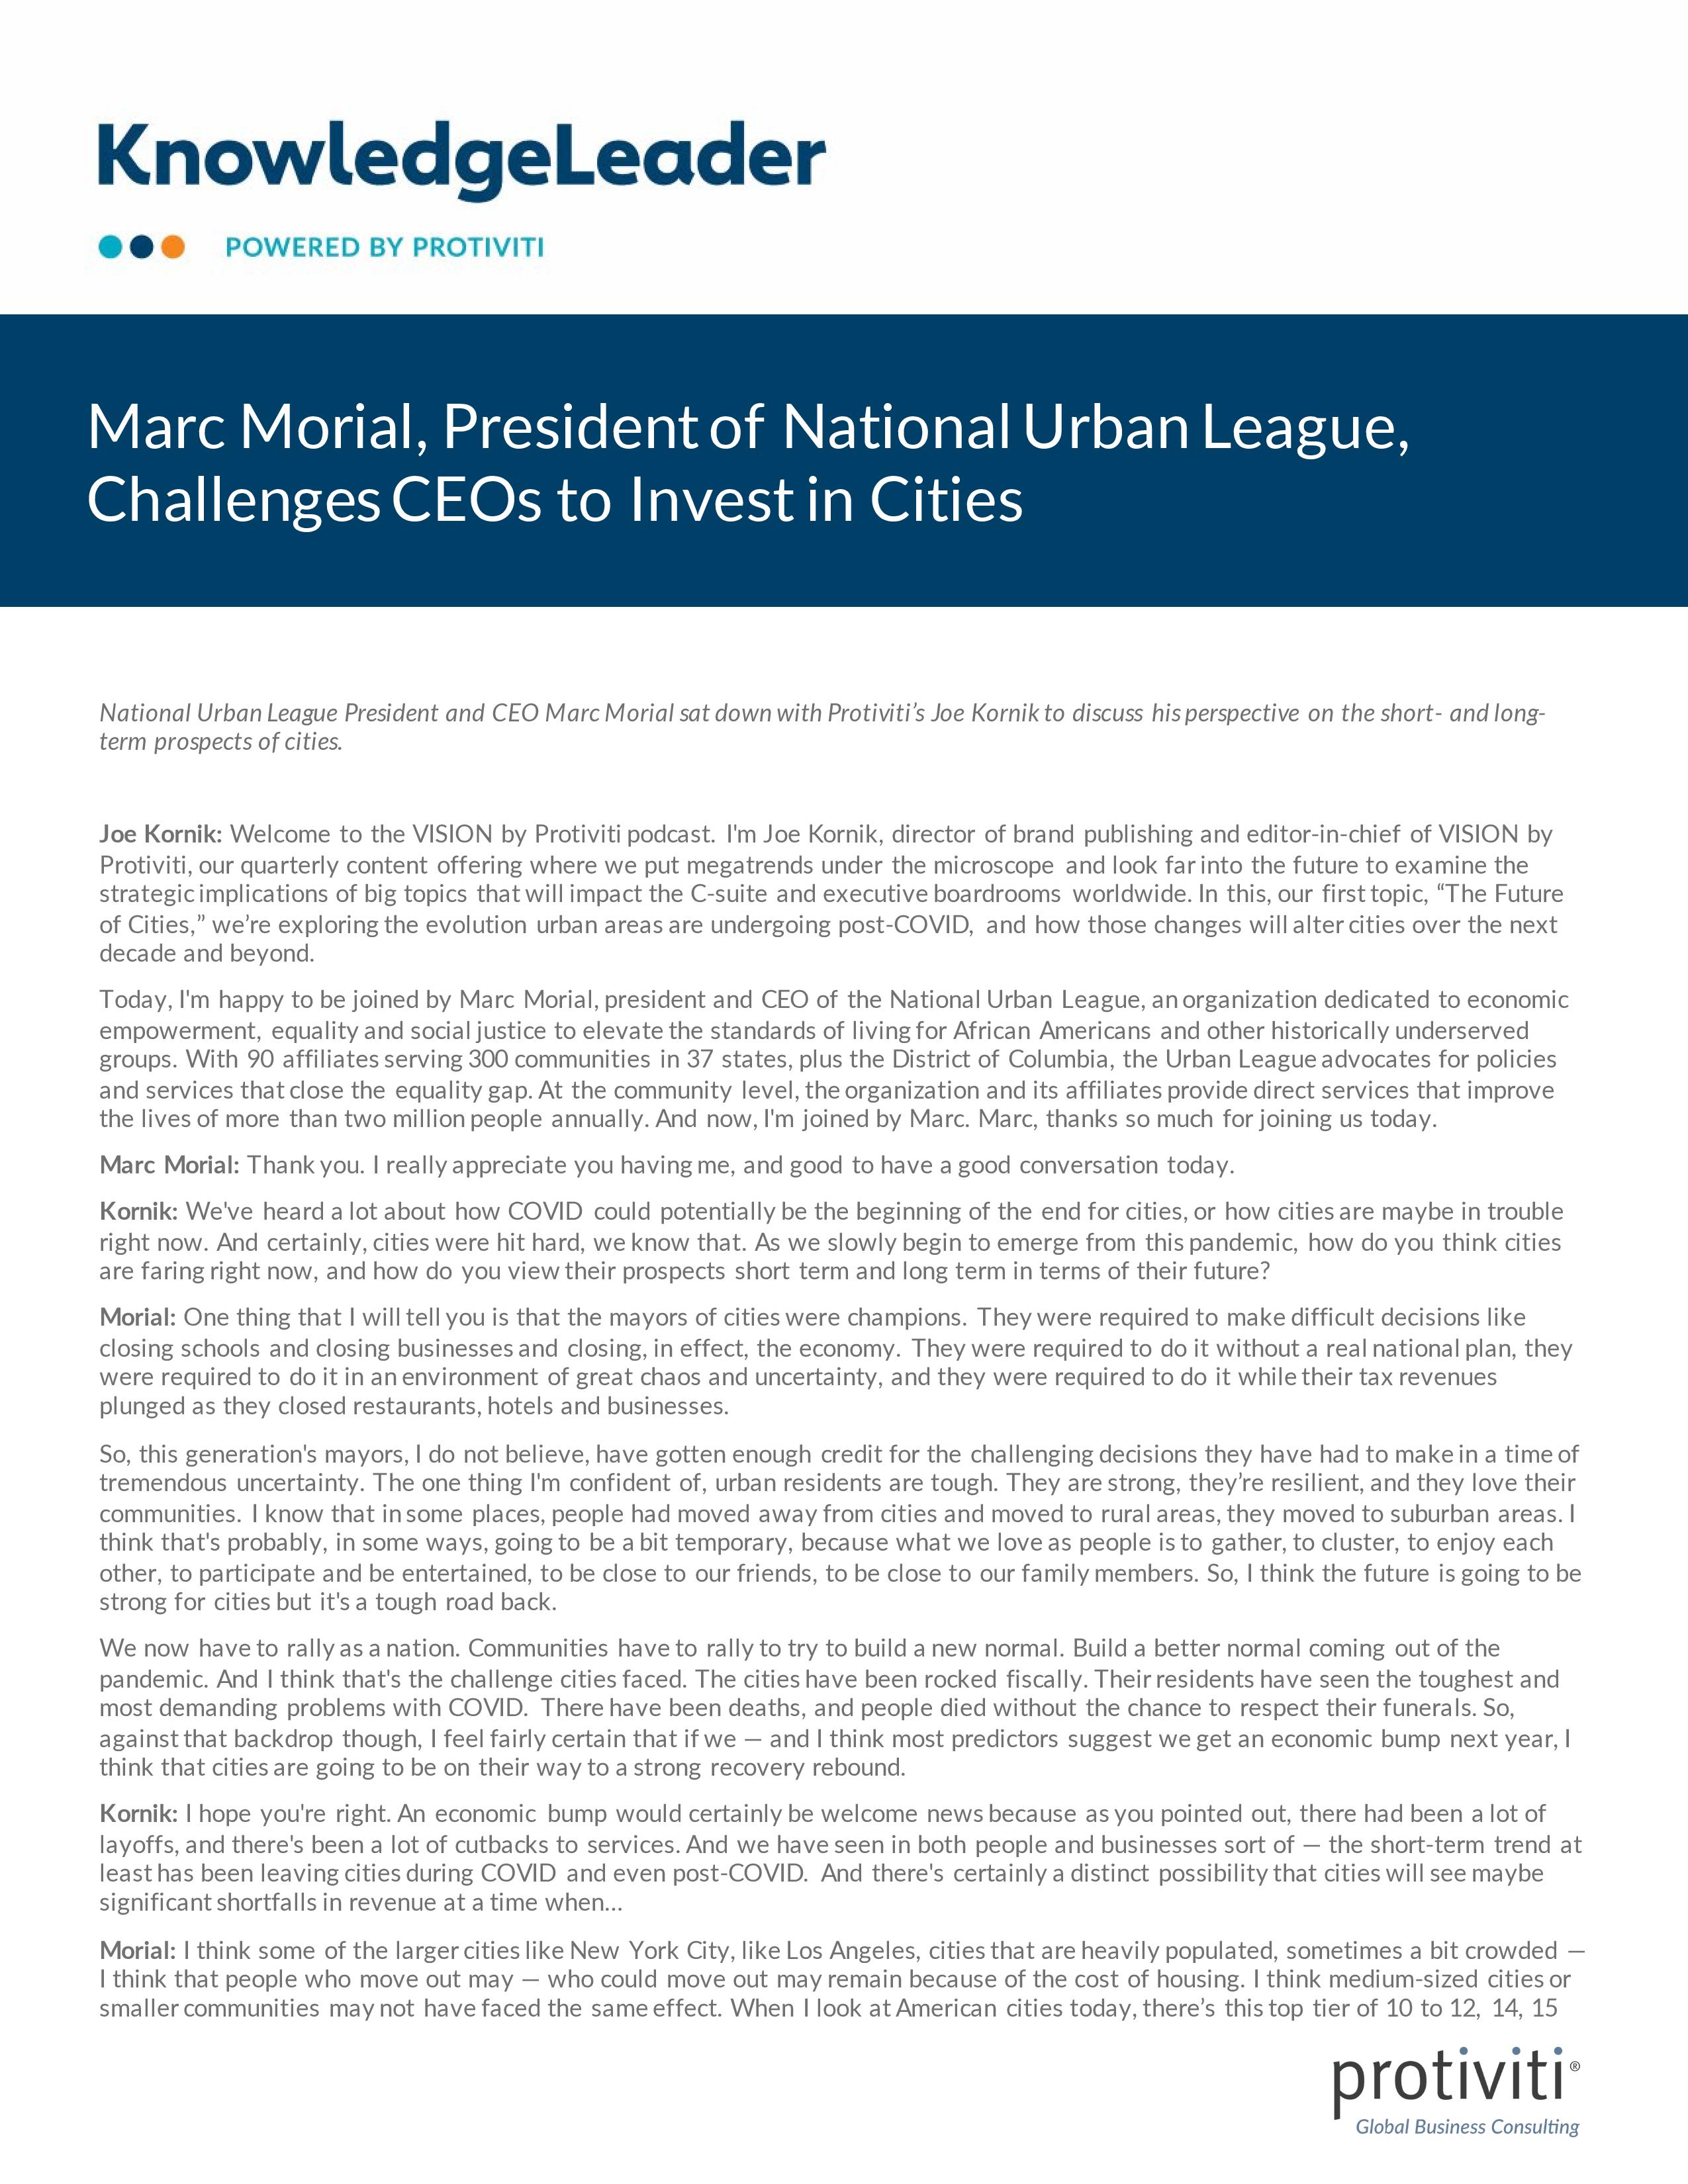 screenshot of the first page of Marc Morial, President of National Urban League, Challenges CEOs to Invest in Cities